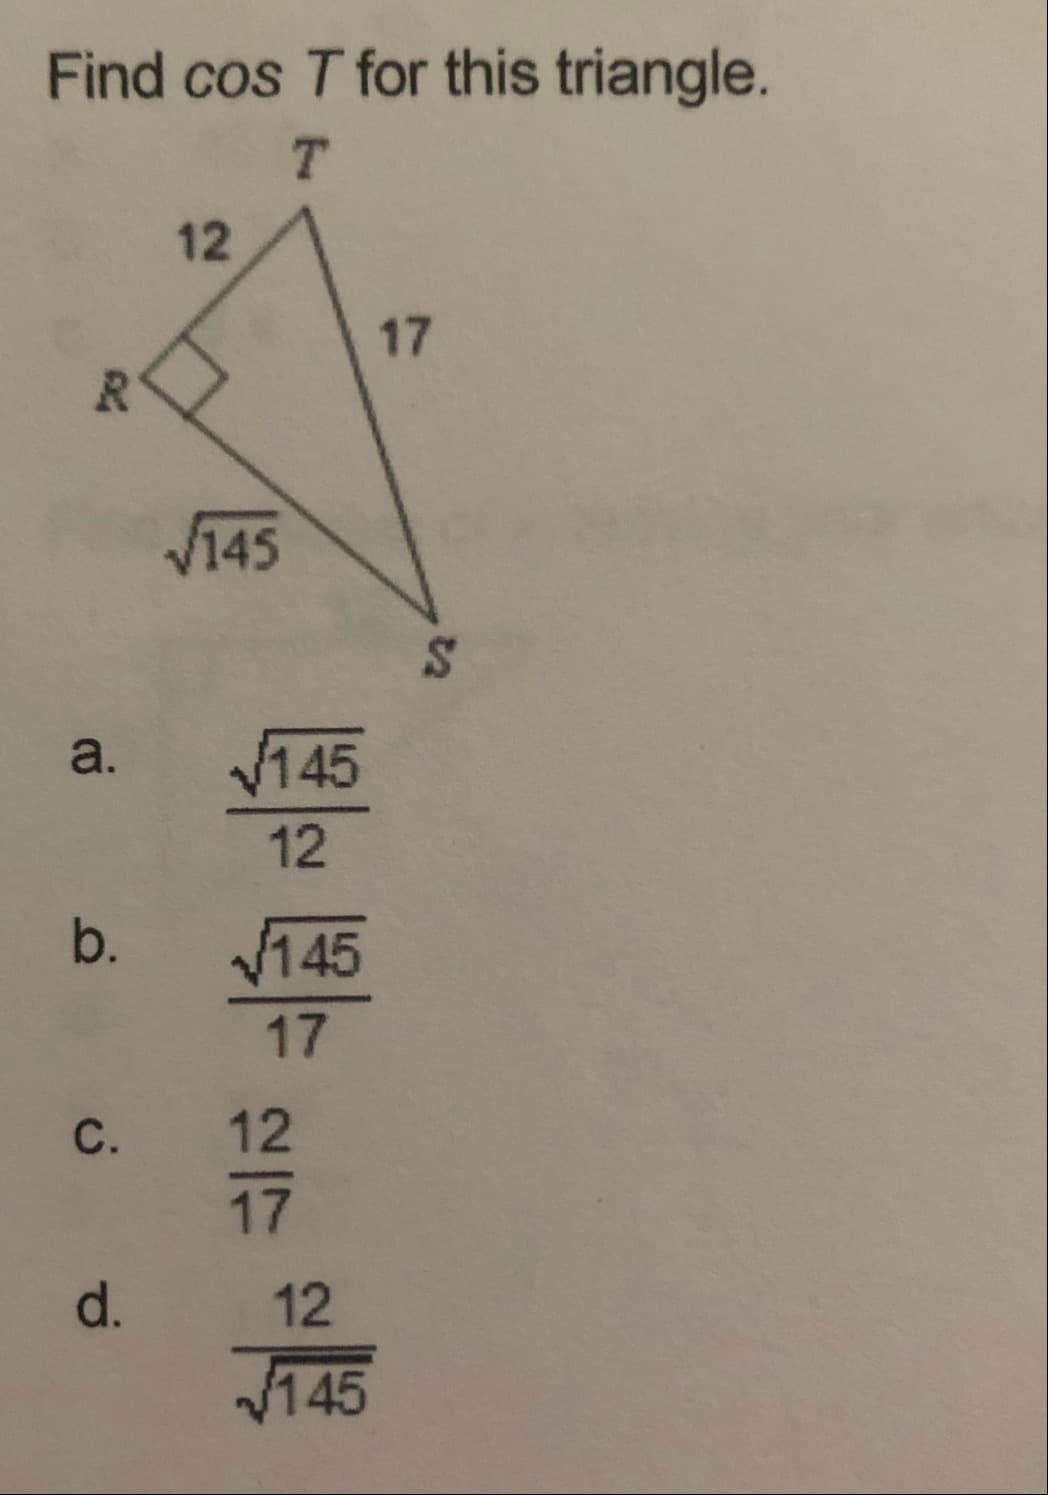 Find cos T for this triangle.
T.
12
17
V145
a.
145
12
b.
145
17
C.
12
17
d.
12
145
